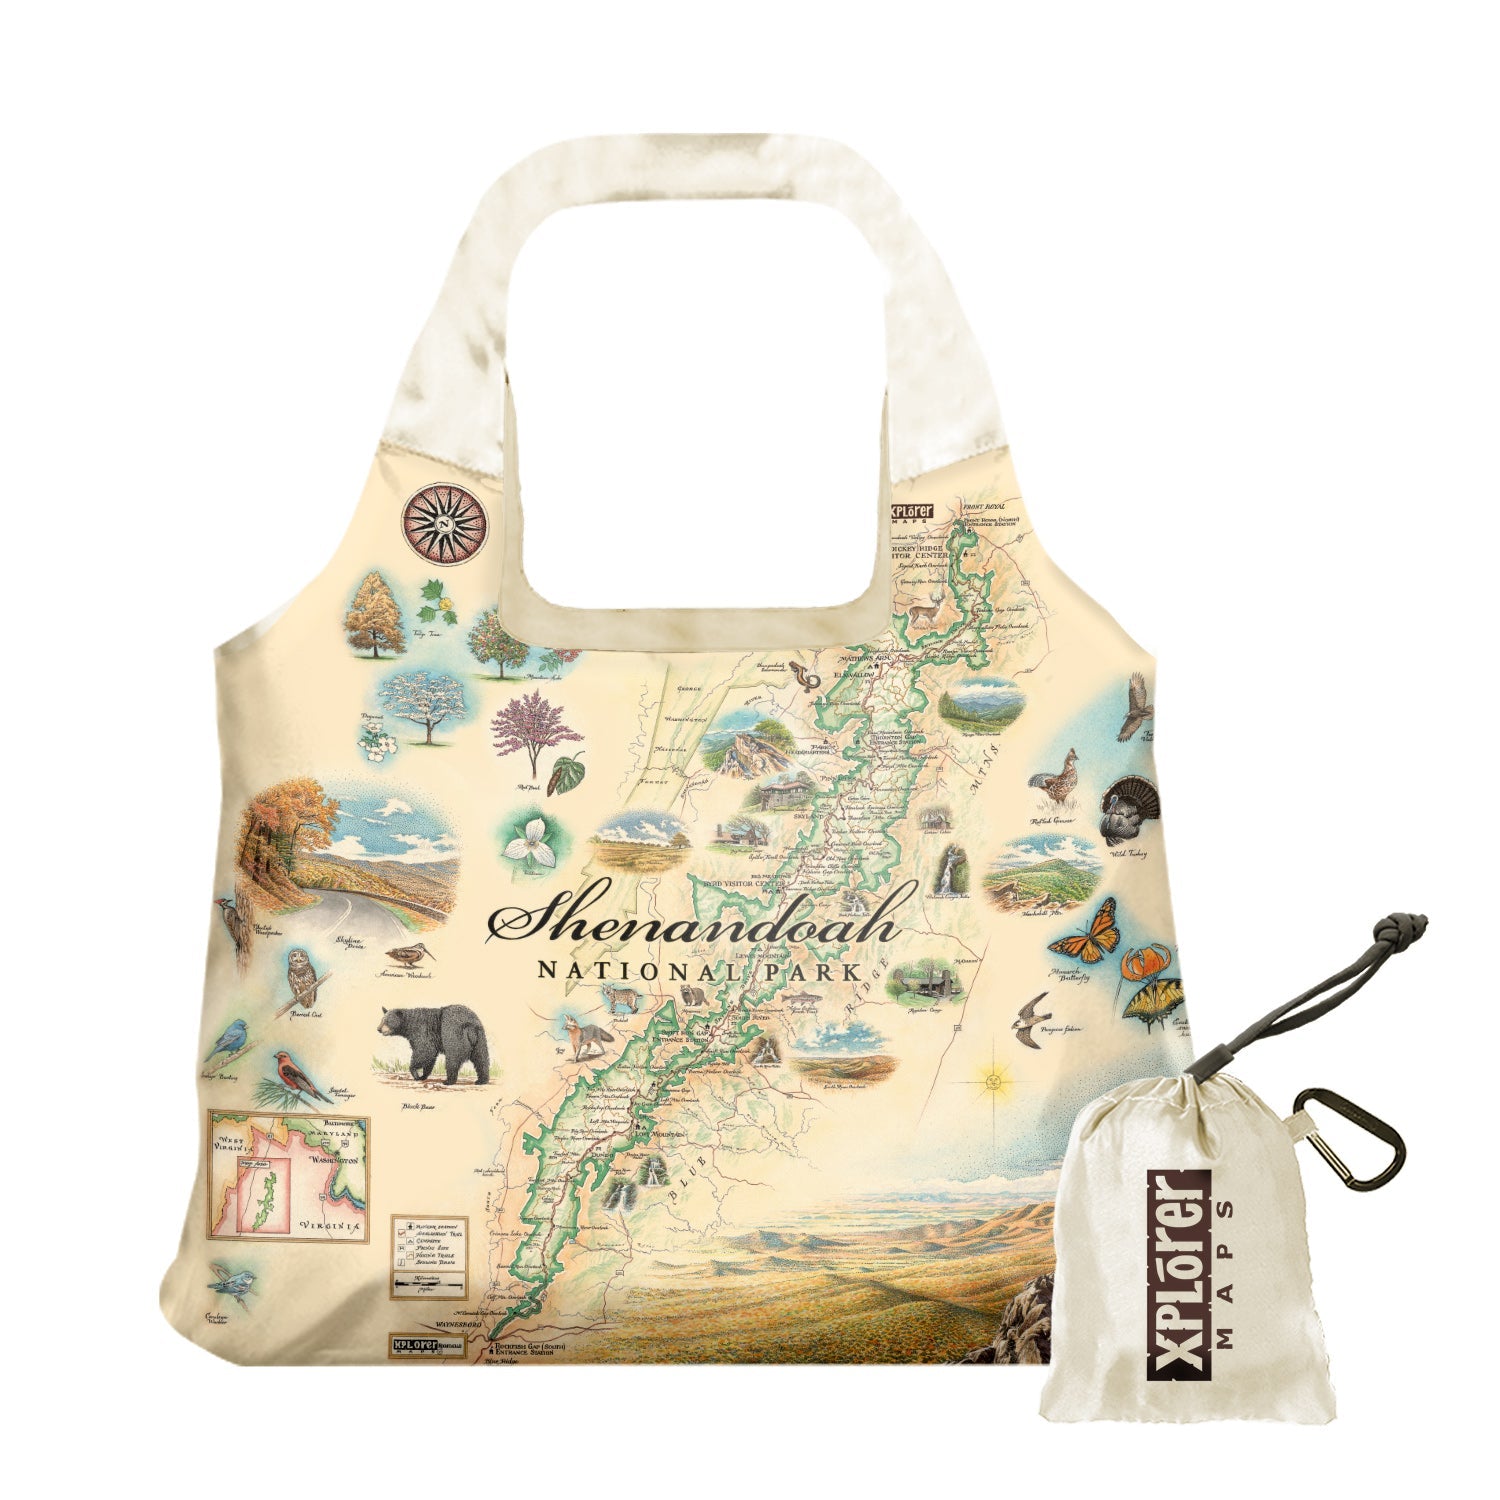 Shenandoah National Park Map Pouch Tote Bags by Xplorer Maps. The map includes illustrations of places such as Skyline Drive, Byrd Visitor Center, and Big Meadows Lodge. Flora and fauna include bobcats, wild turkeys, trillium flowers, and a dogwood tree.